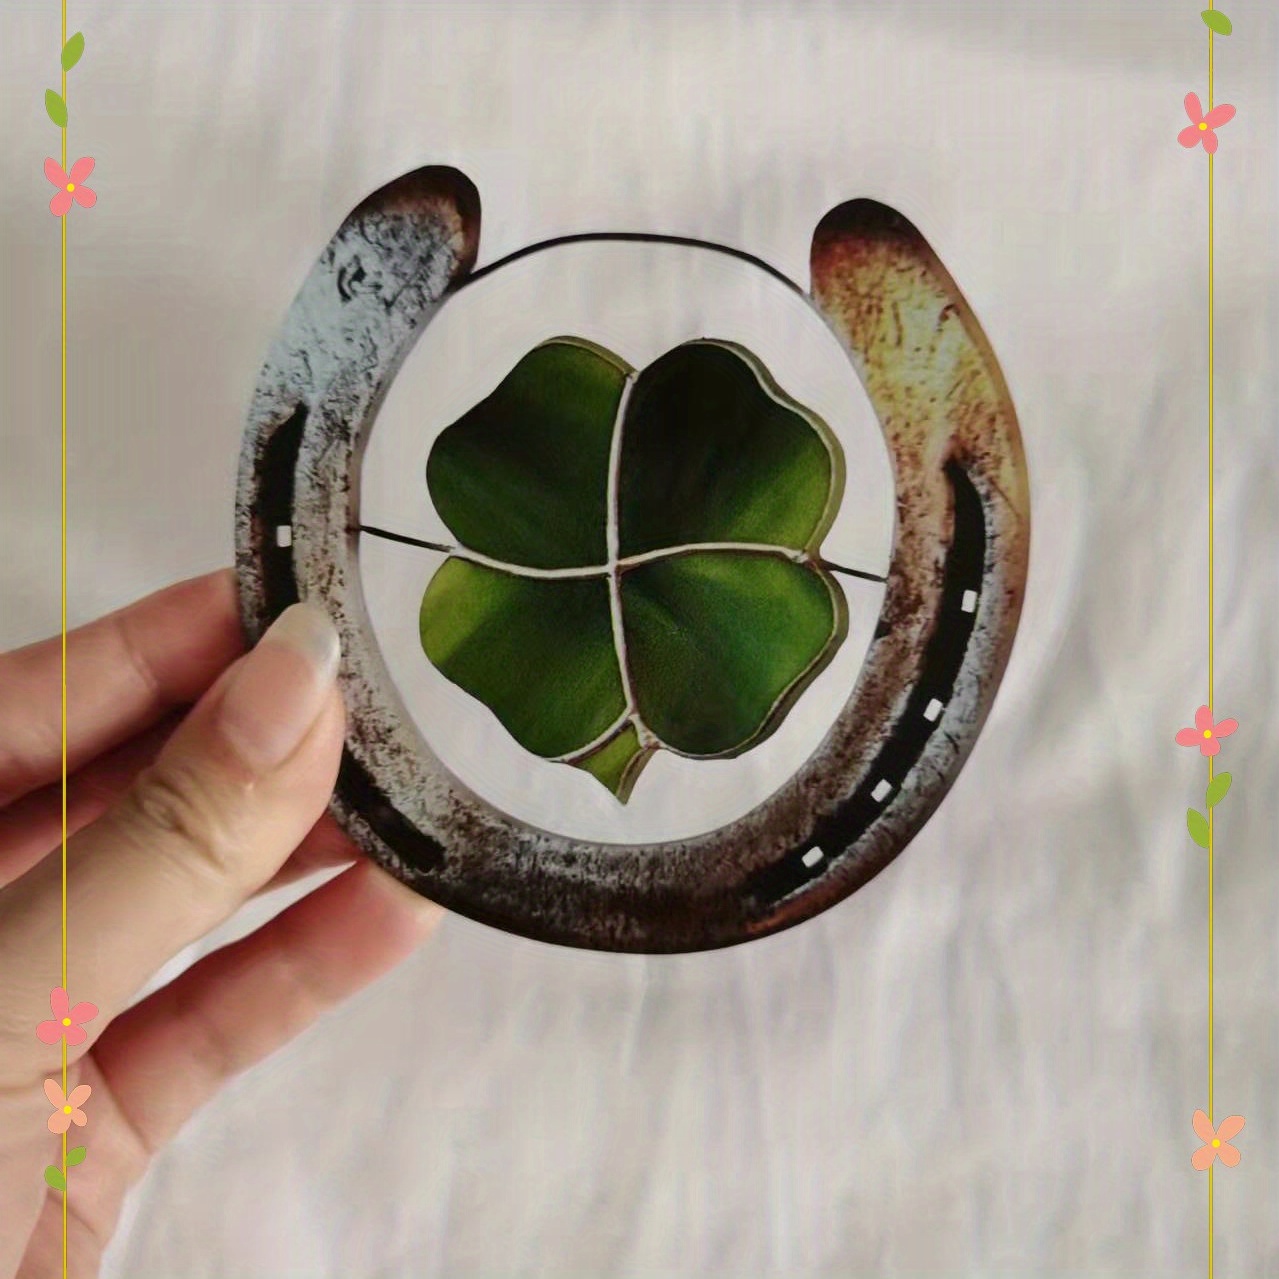 Best Deal for Four Leaf Clover Lucky Horseshoe,Horseshoe Metal Four Leaf